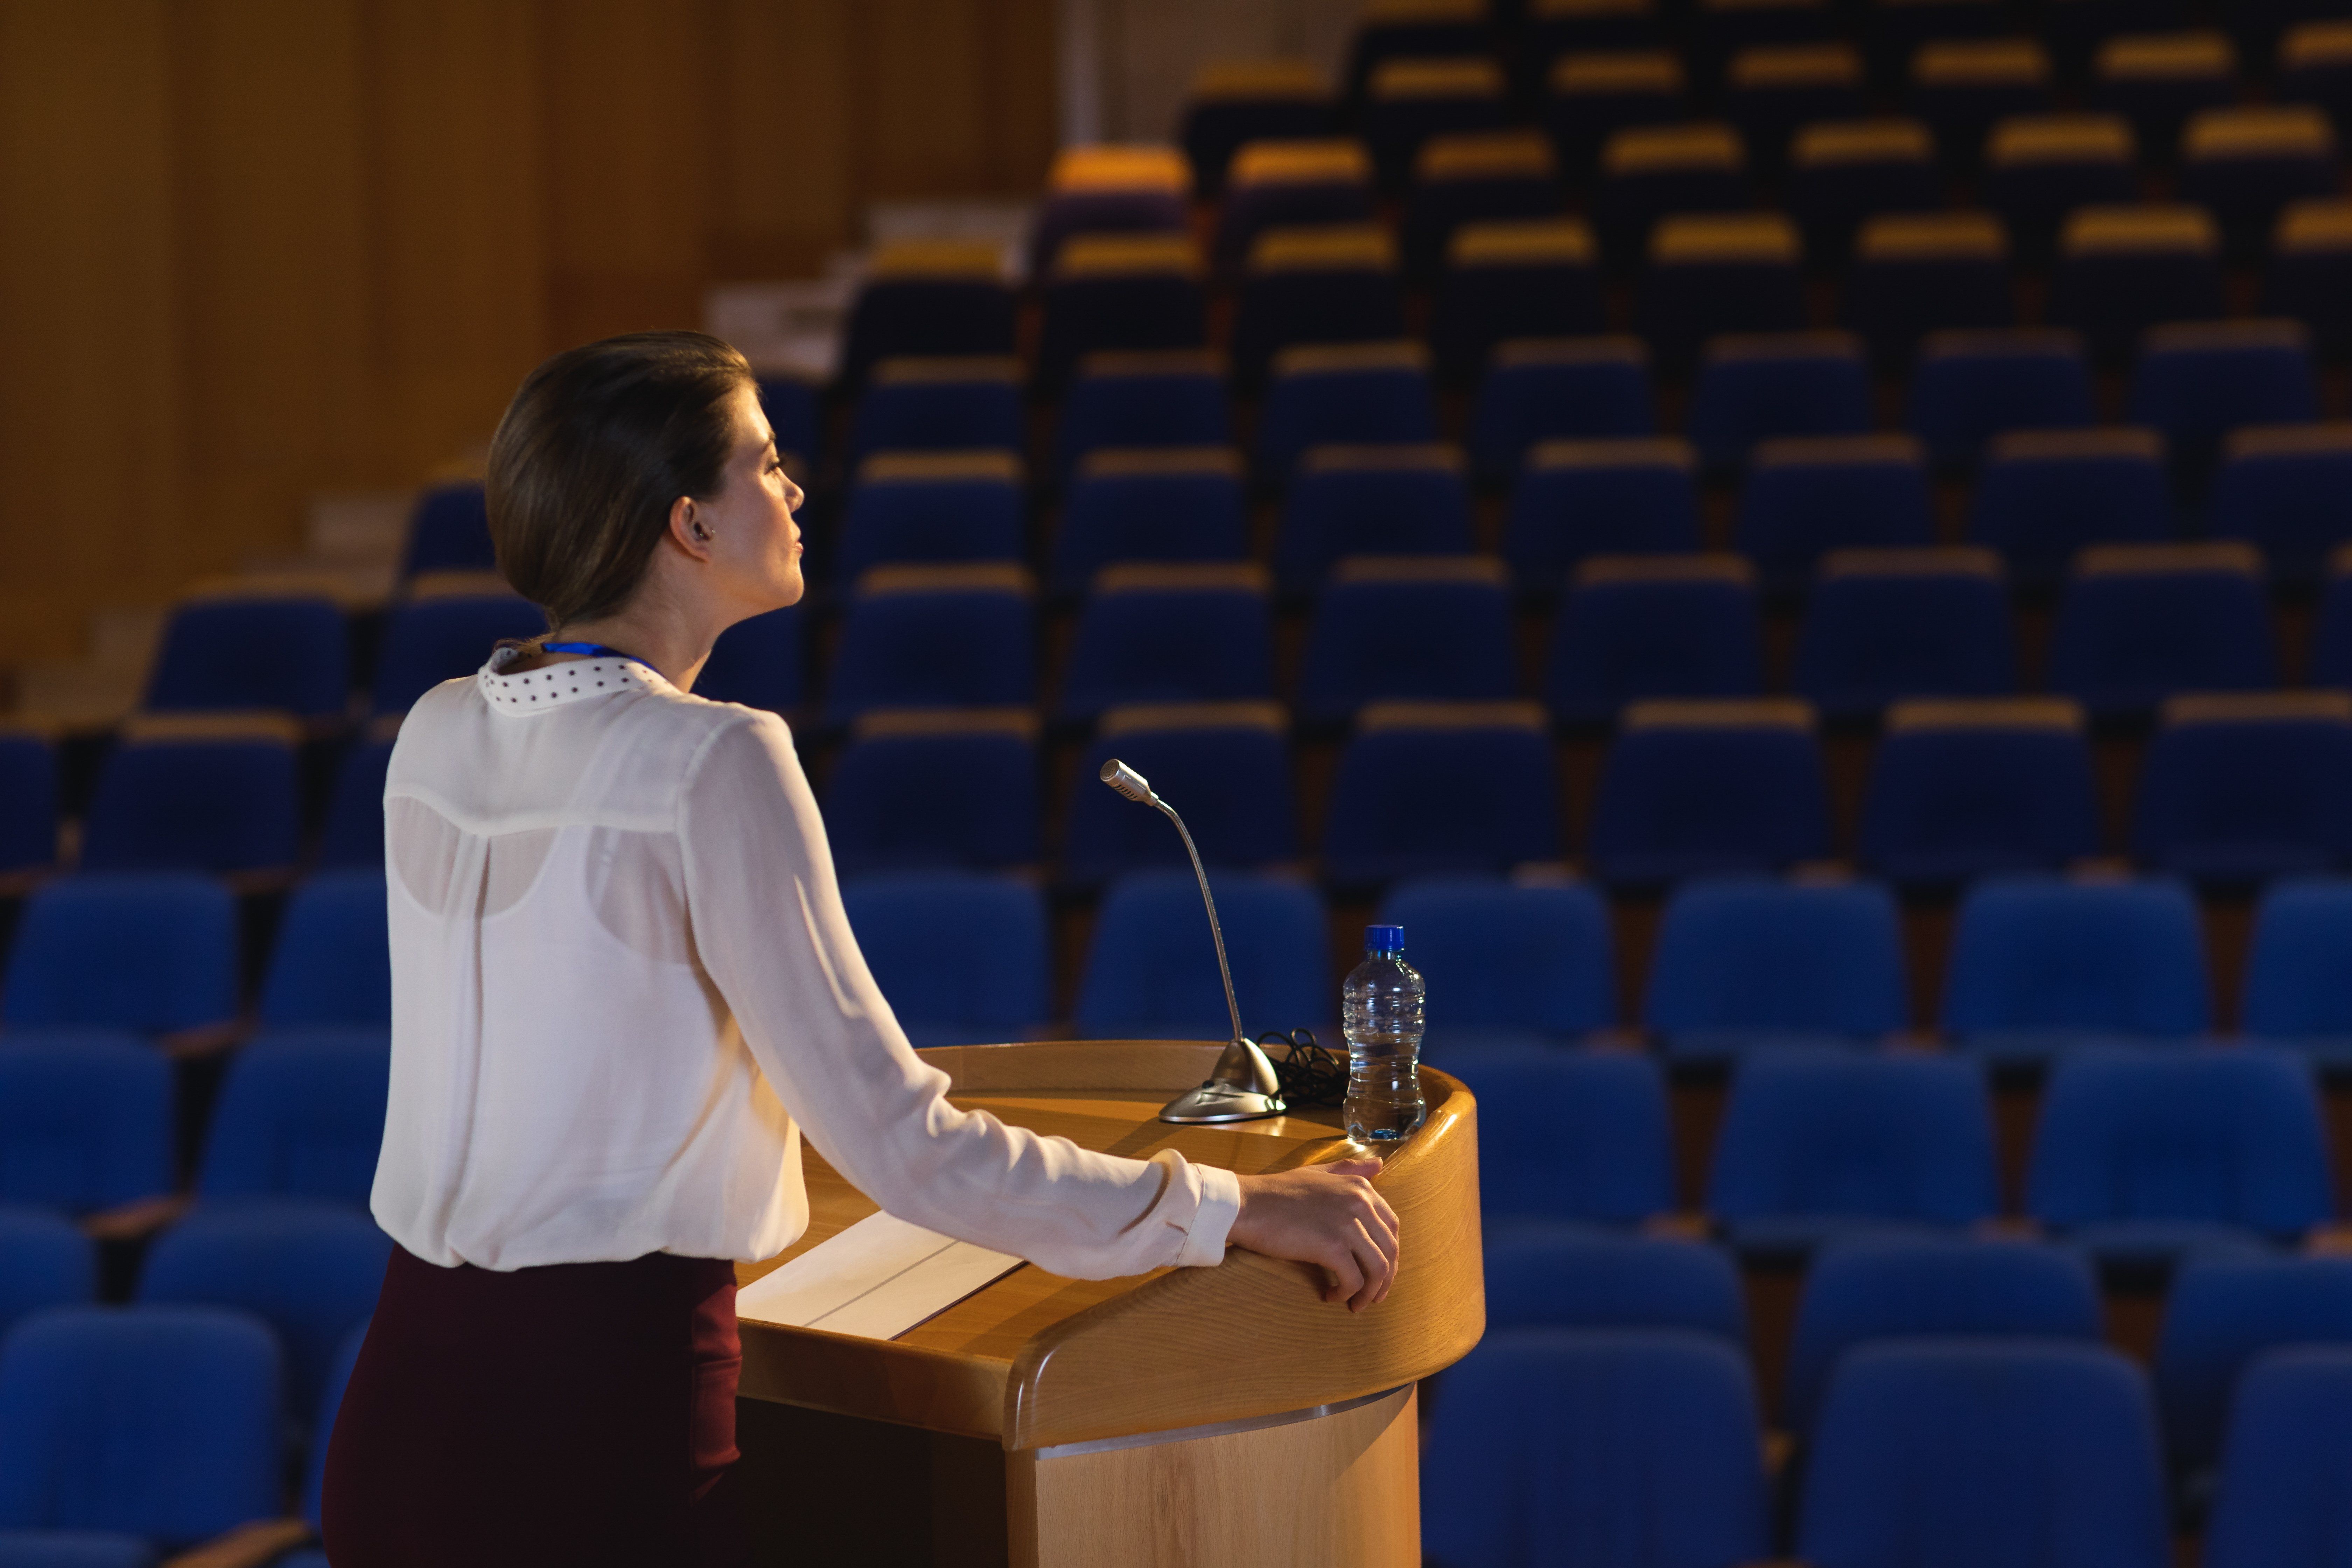 a woman stands at a podium in front of empty seats